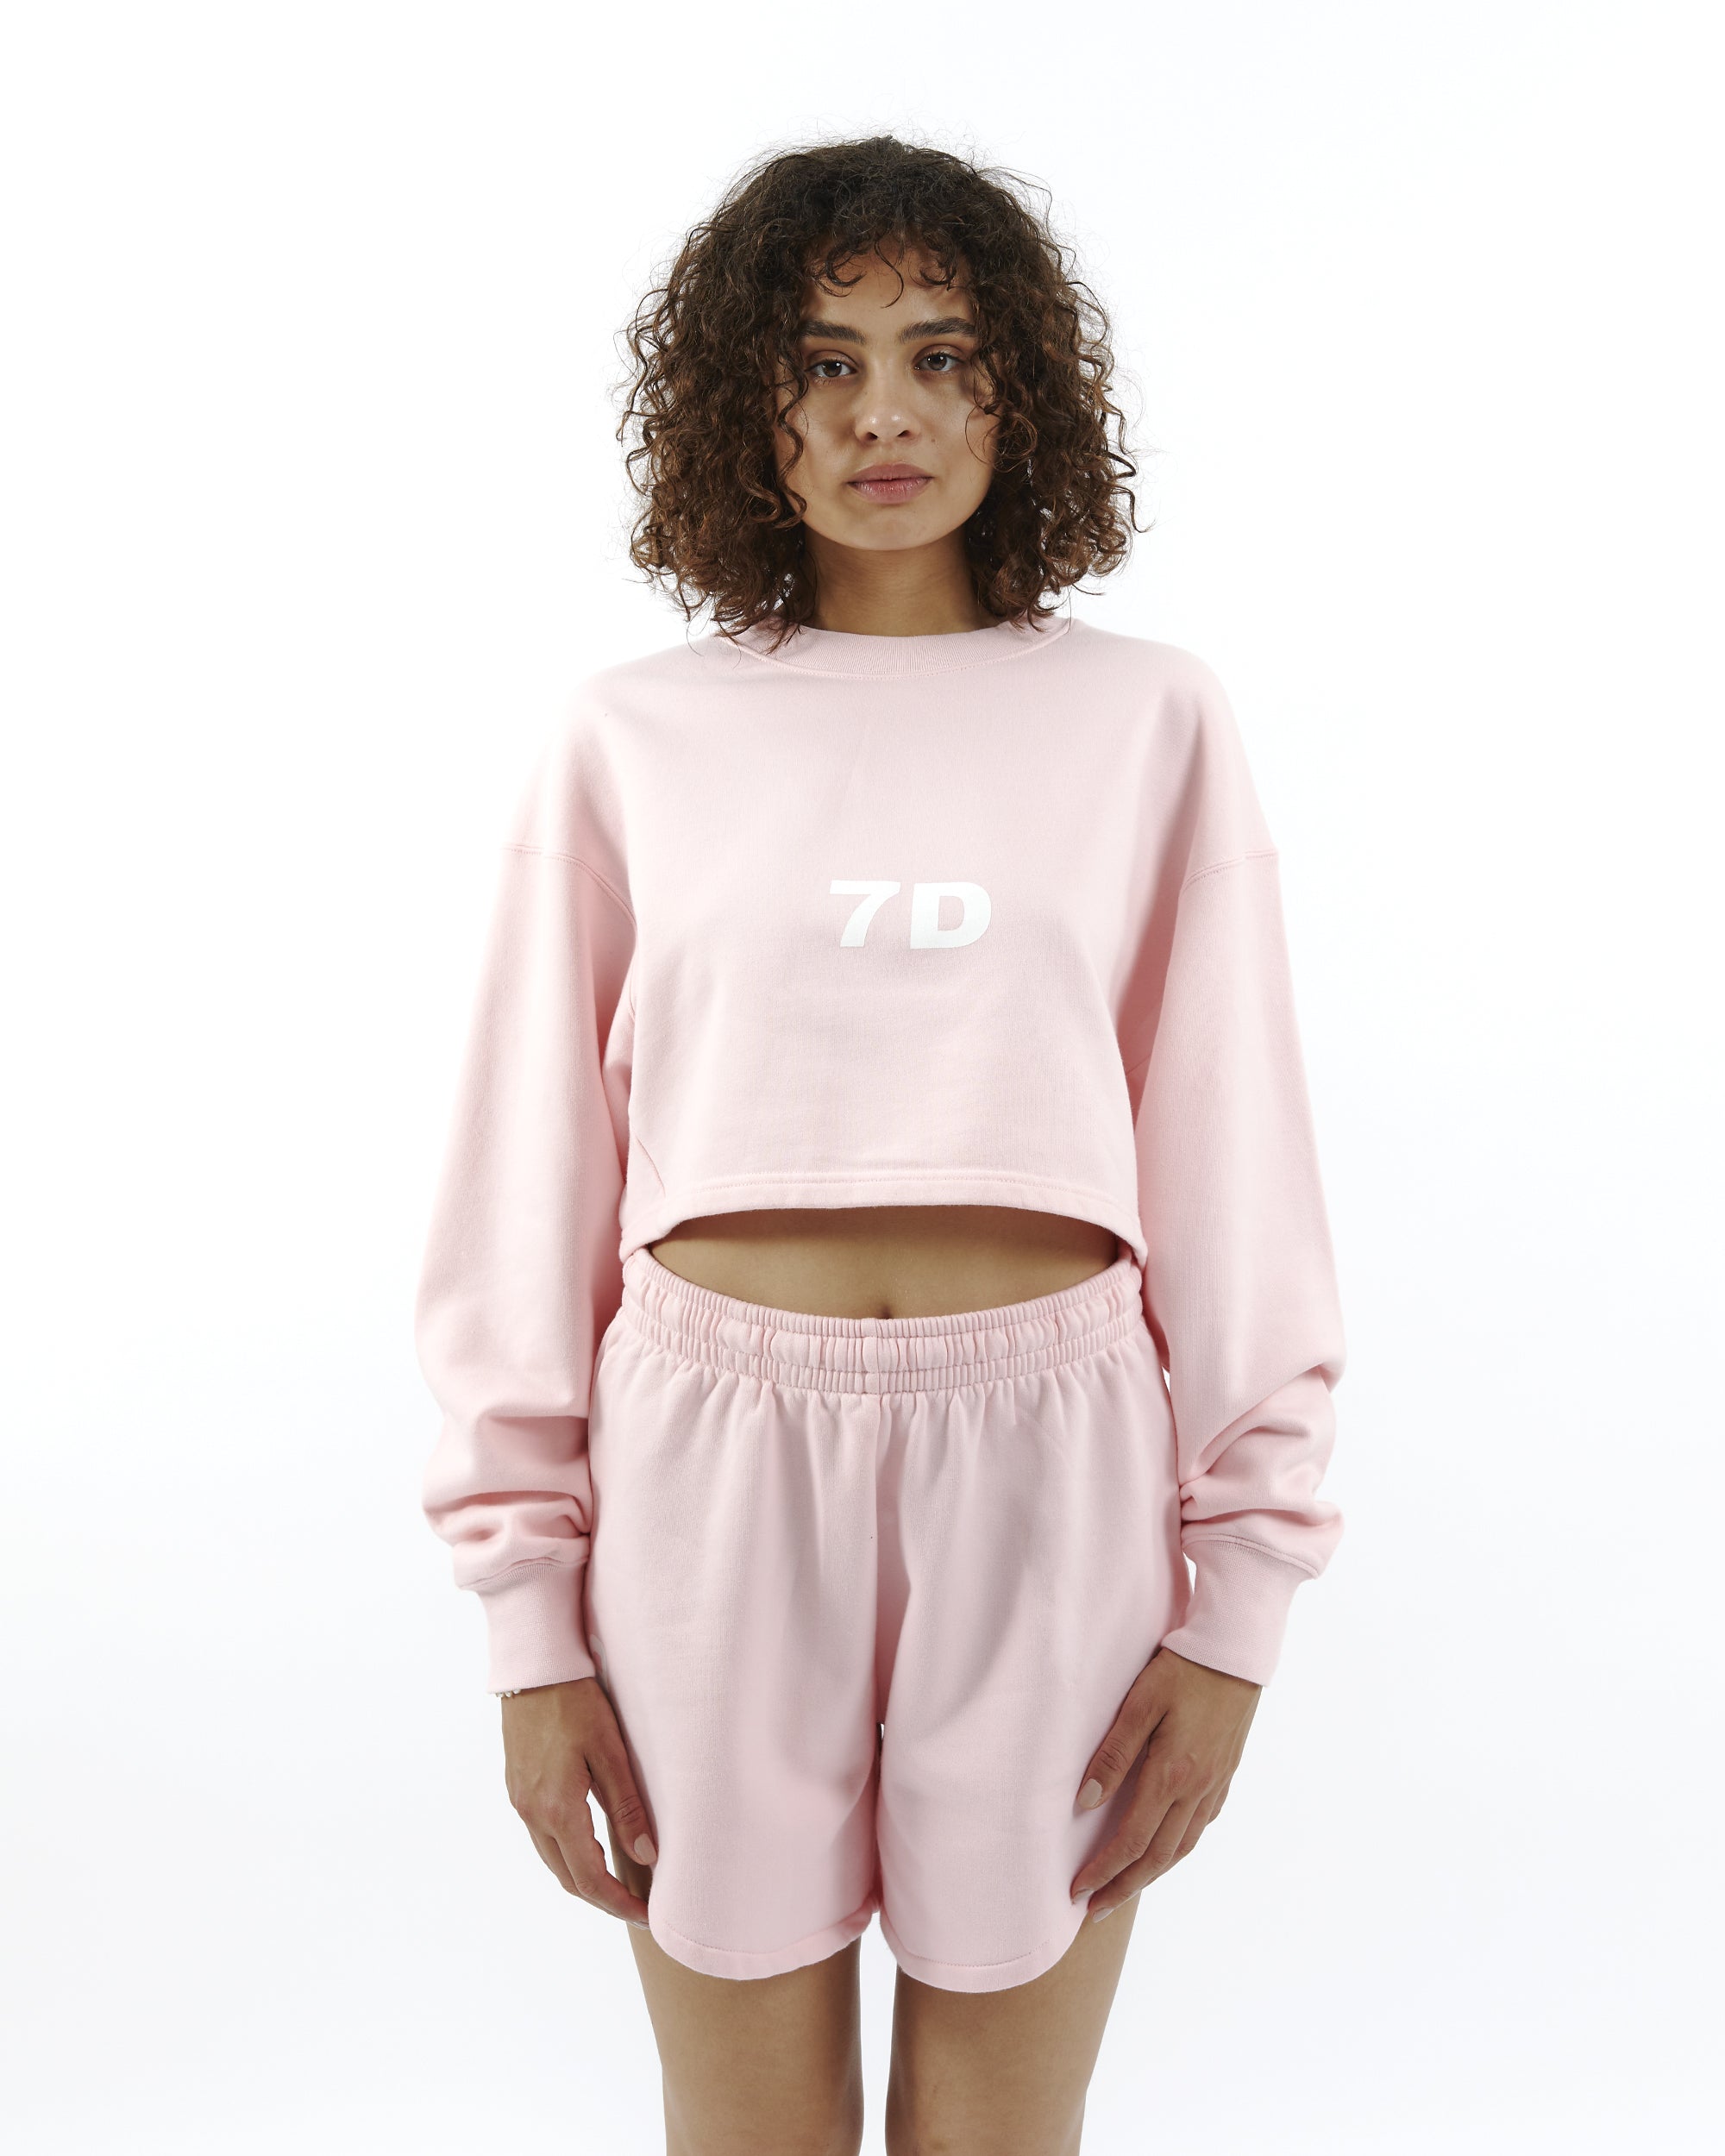 7 DAYS ACTIVE Monday Cropped Crewneck Rose Shadow 90473-134